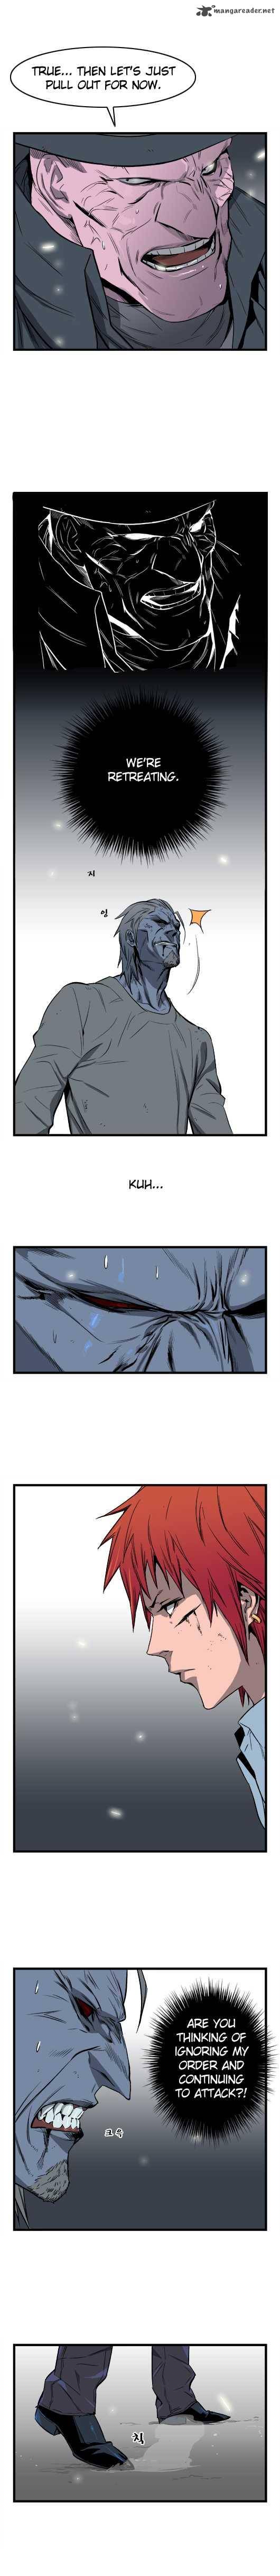 Noblesse 34 4